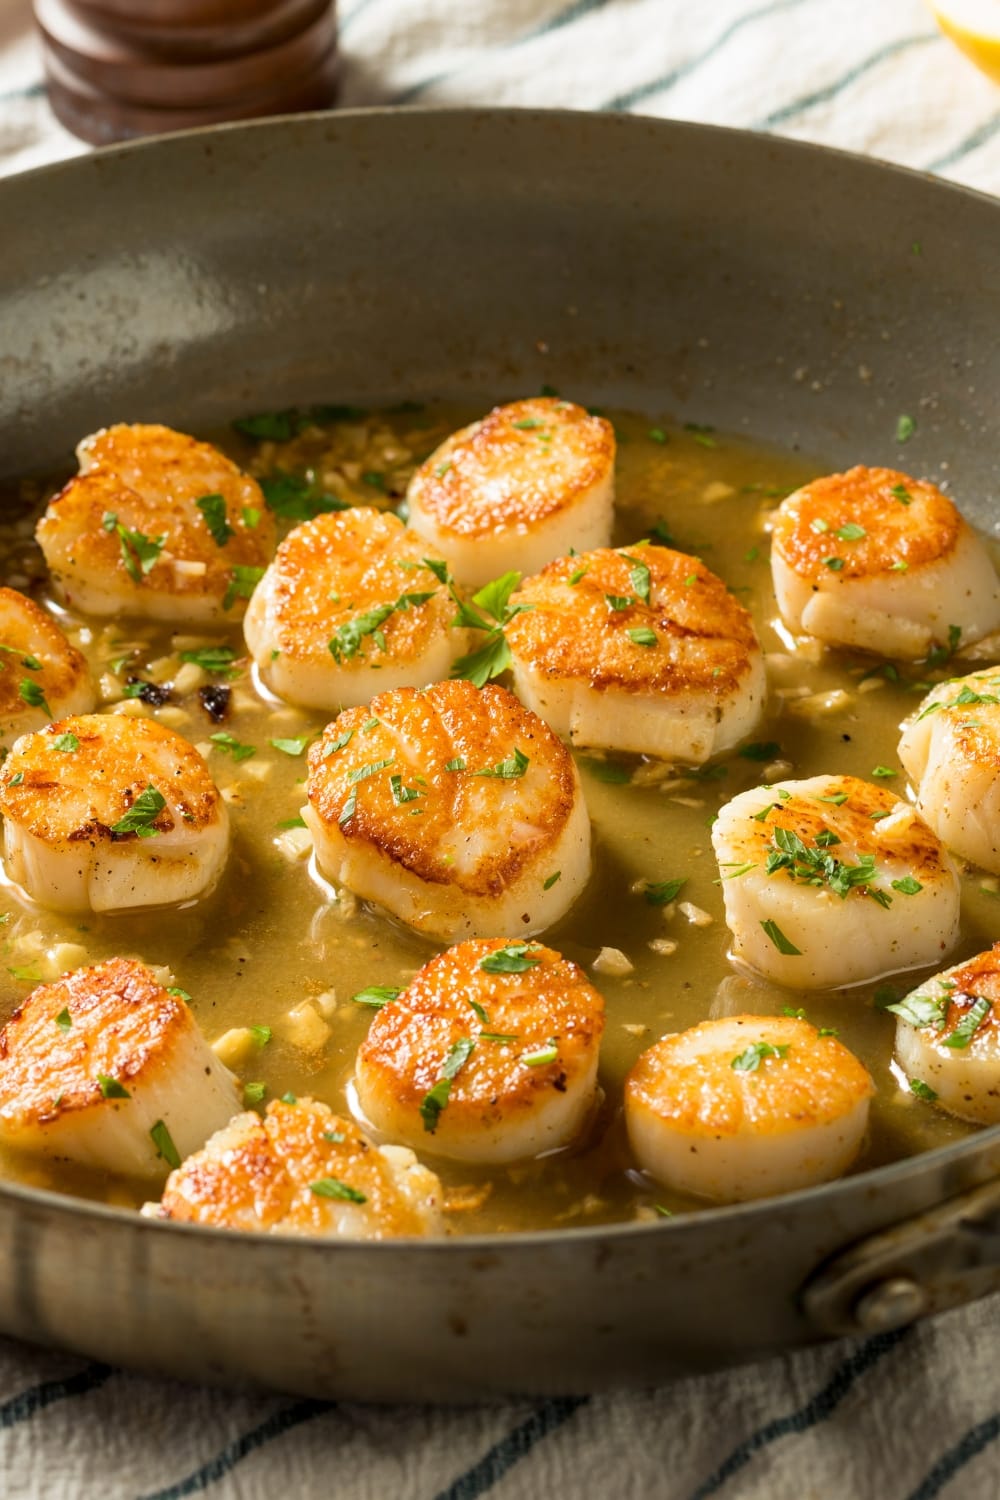 Pan-Seared Scallops with Garlic and Broth, Garnished With Chopped Parsley Leaves